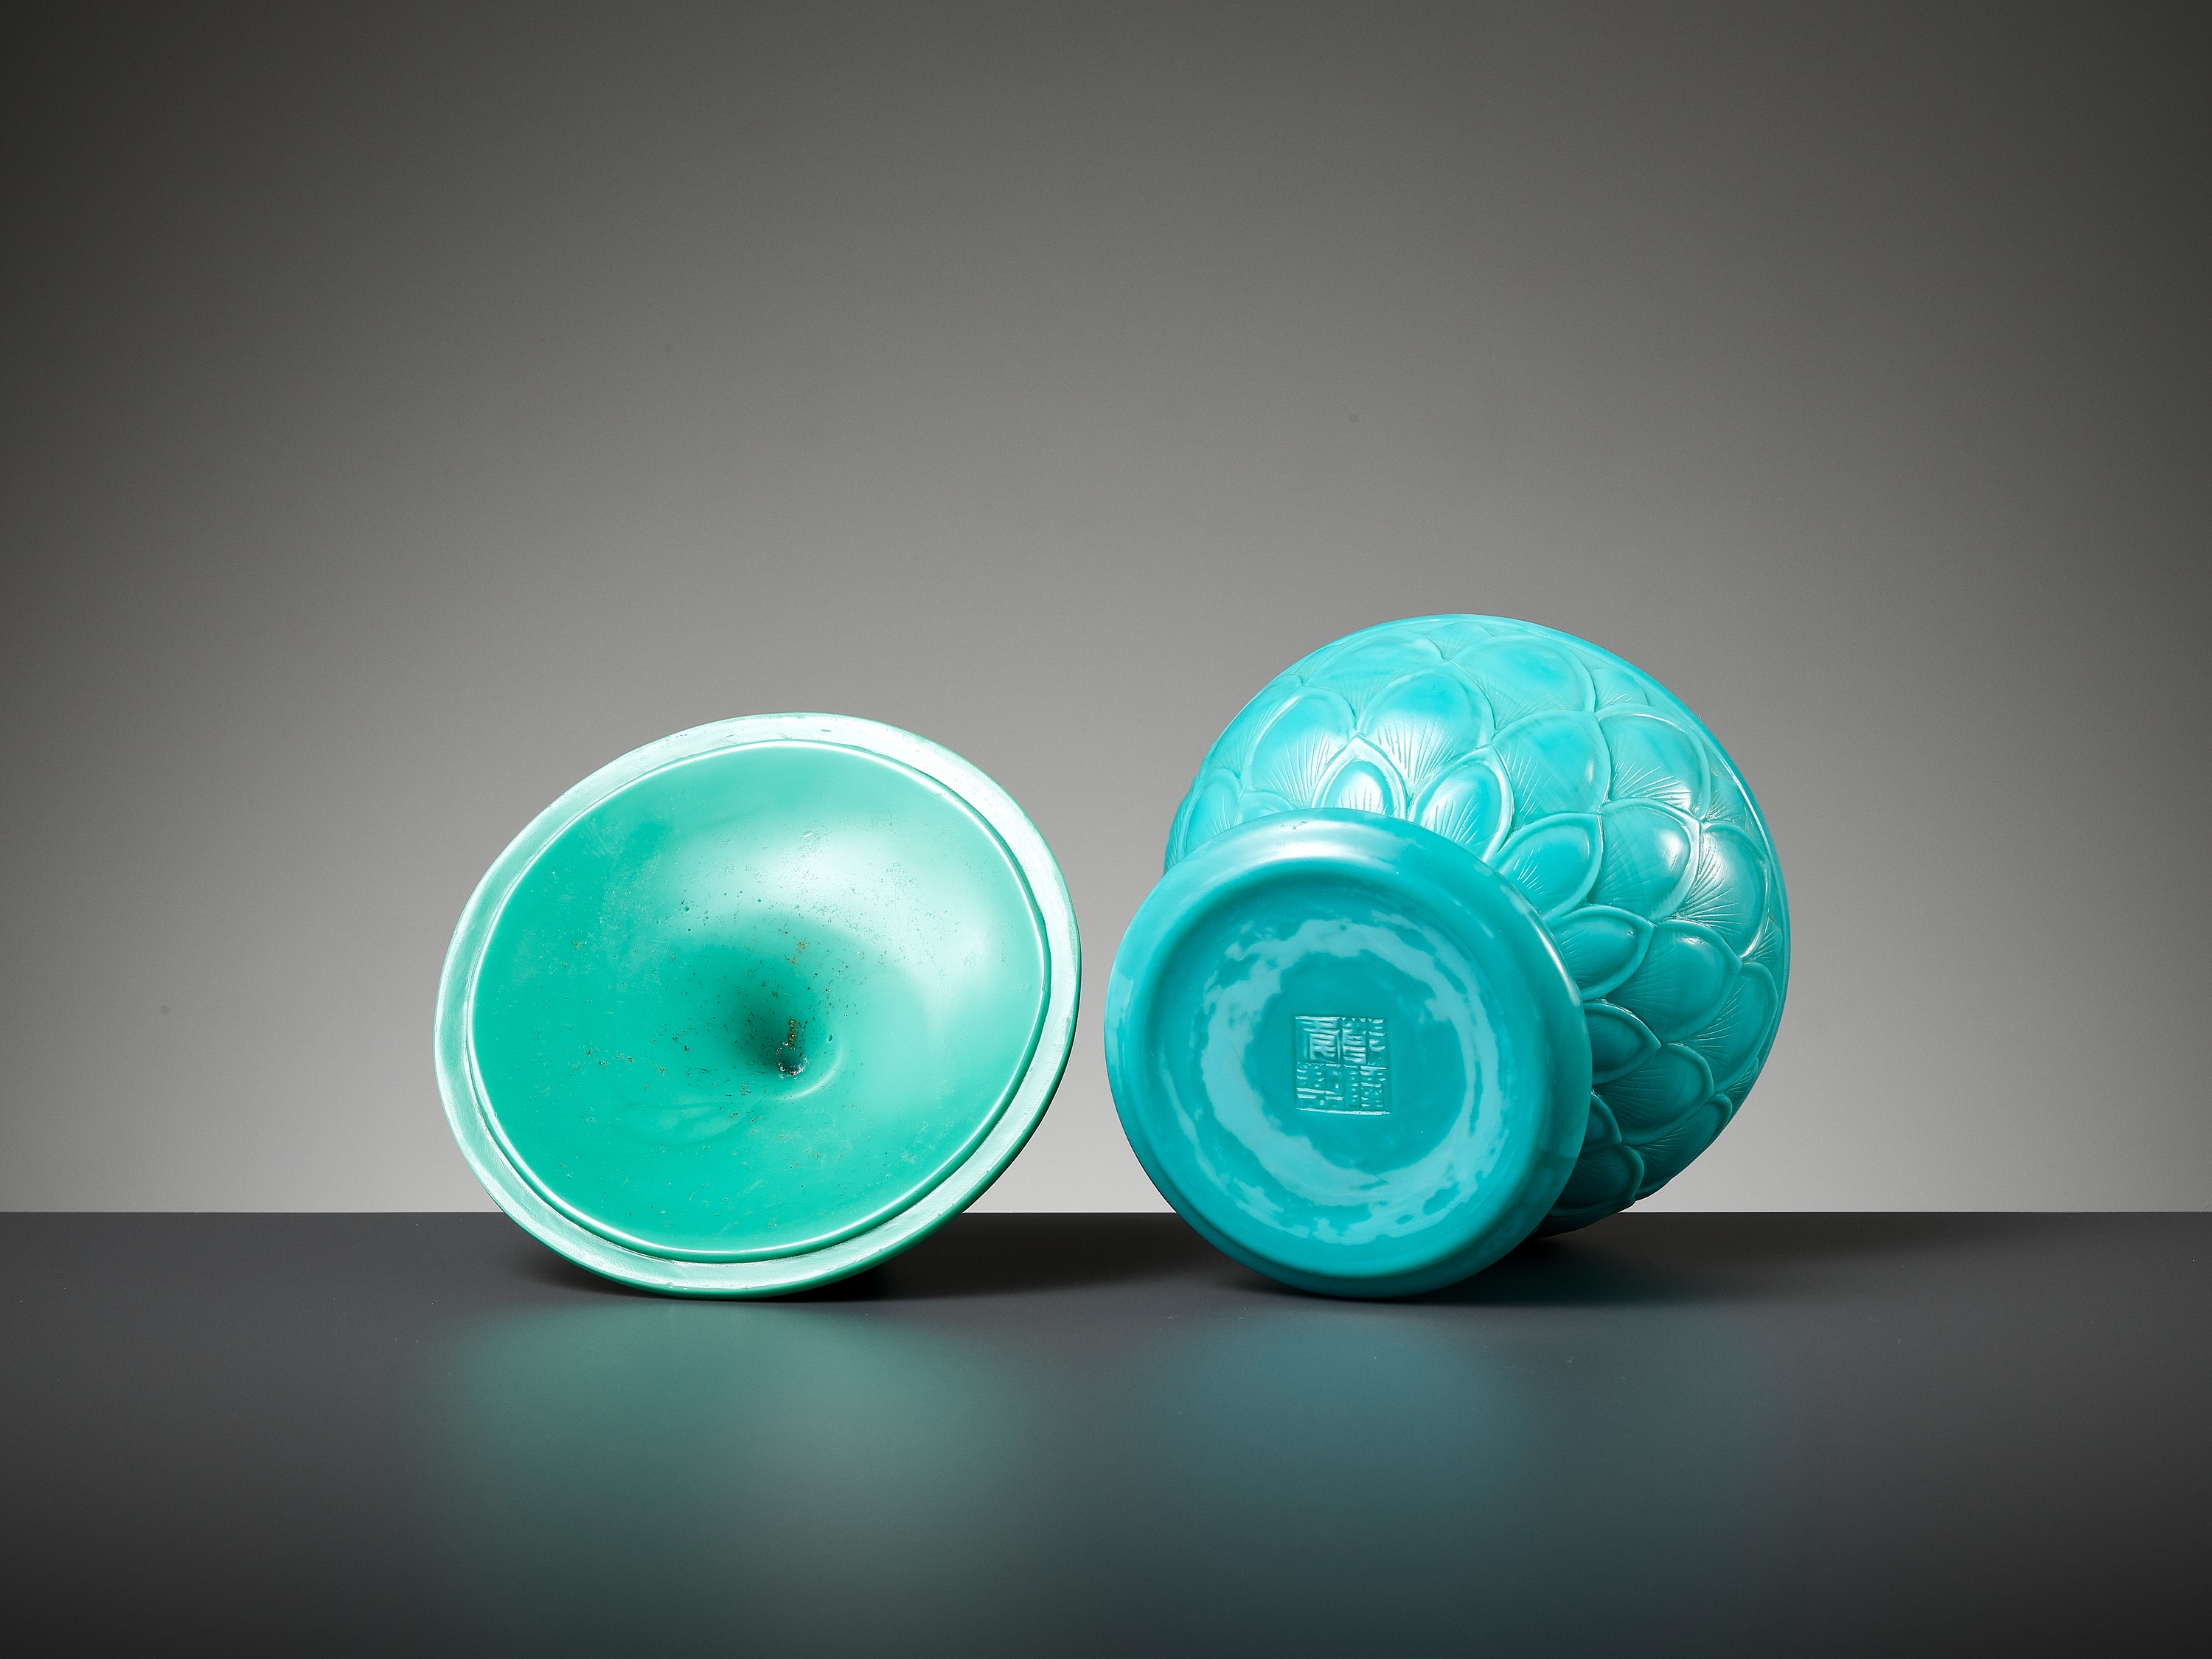 A RARE TURQUOISE PEKING GLASS STEM BOWL AND COVER, QIANLONG MARK AND PERIOD - Image 11 of 12